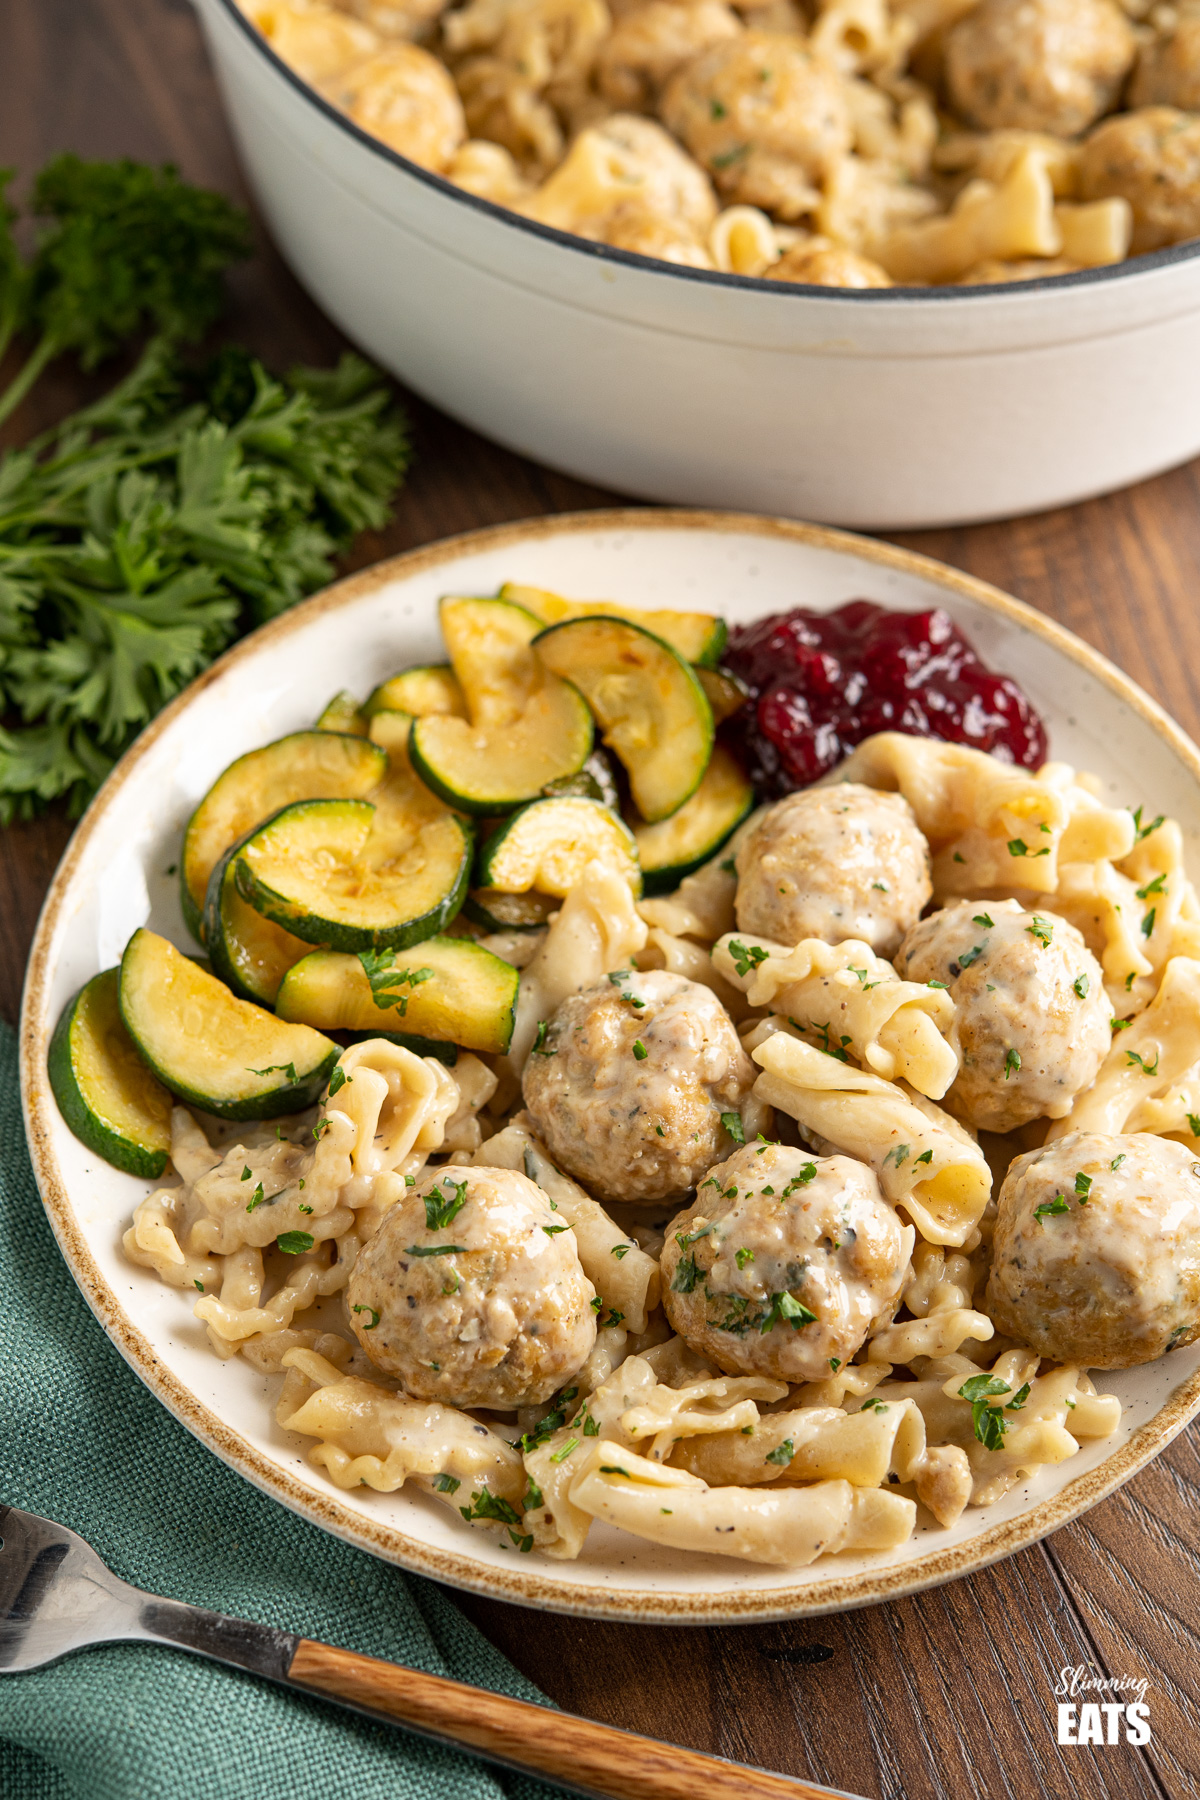 white plate with golden yellow rim dished up with One Pot Turkey Swedish Meatball Pasta sauteed zucchini and lingonberry sauce